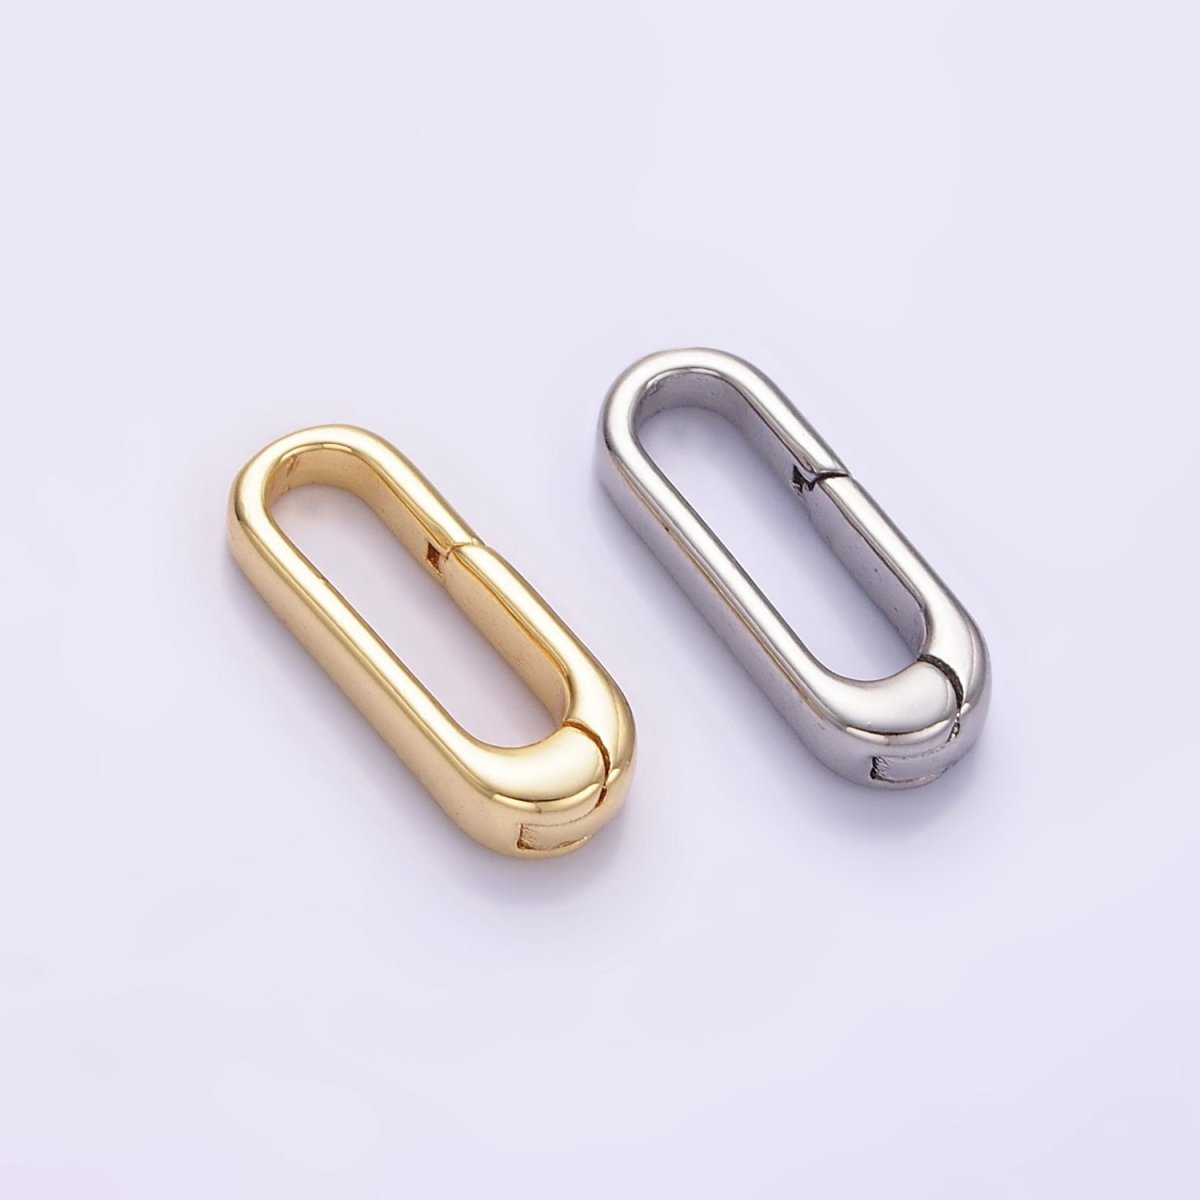 24K Gold Filled 15mm Oblong Push Spring Gate Findings in Gold & Silver | Z804 - DLUXCA